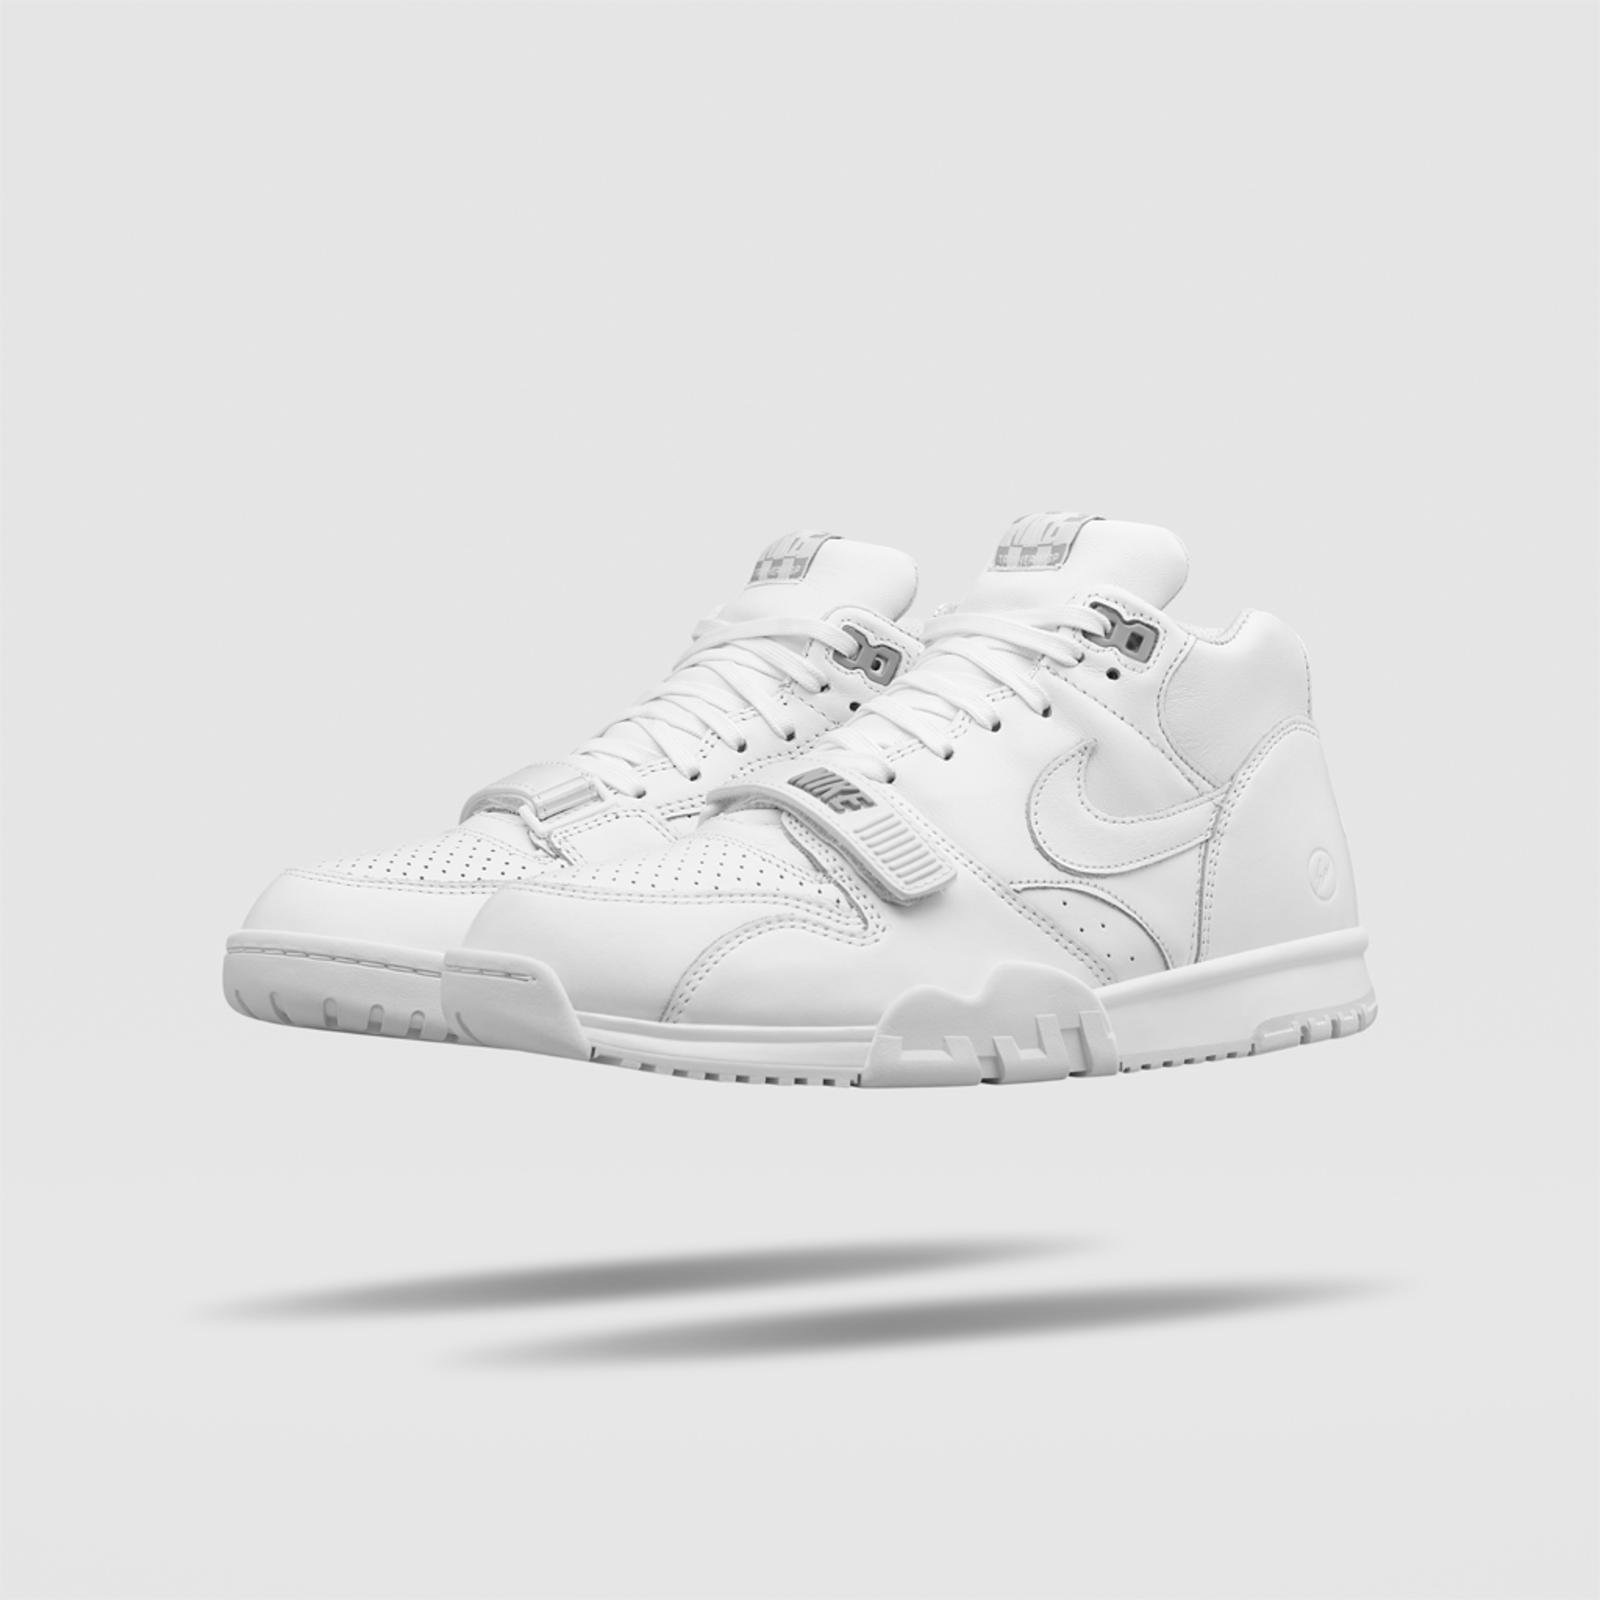 NIKECOURT AIR TRAINER 1 MID X fragment | SHOES MASTER